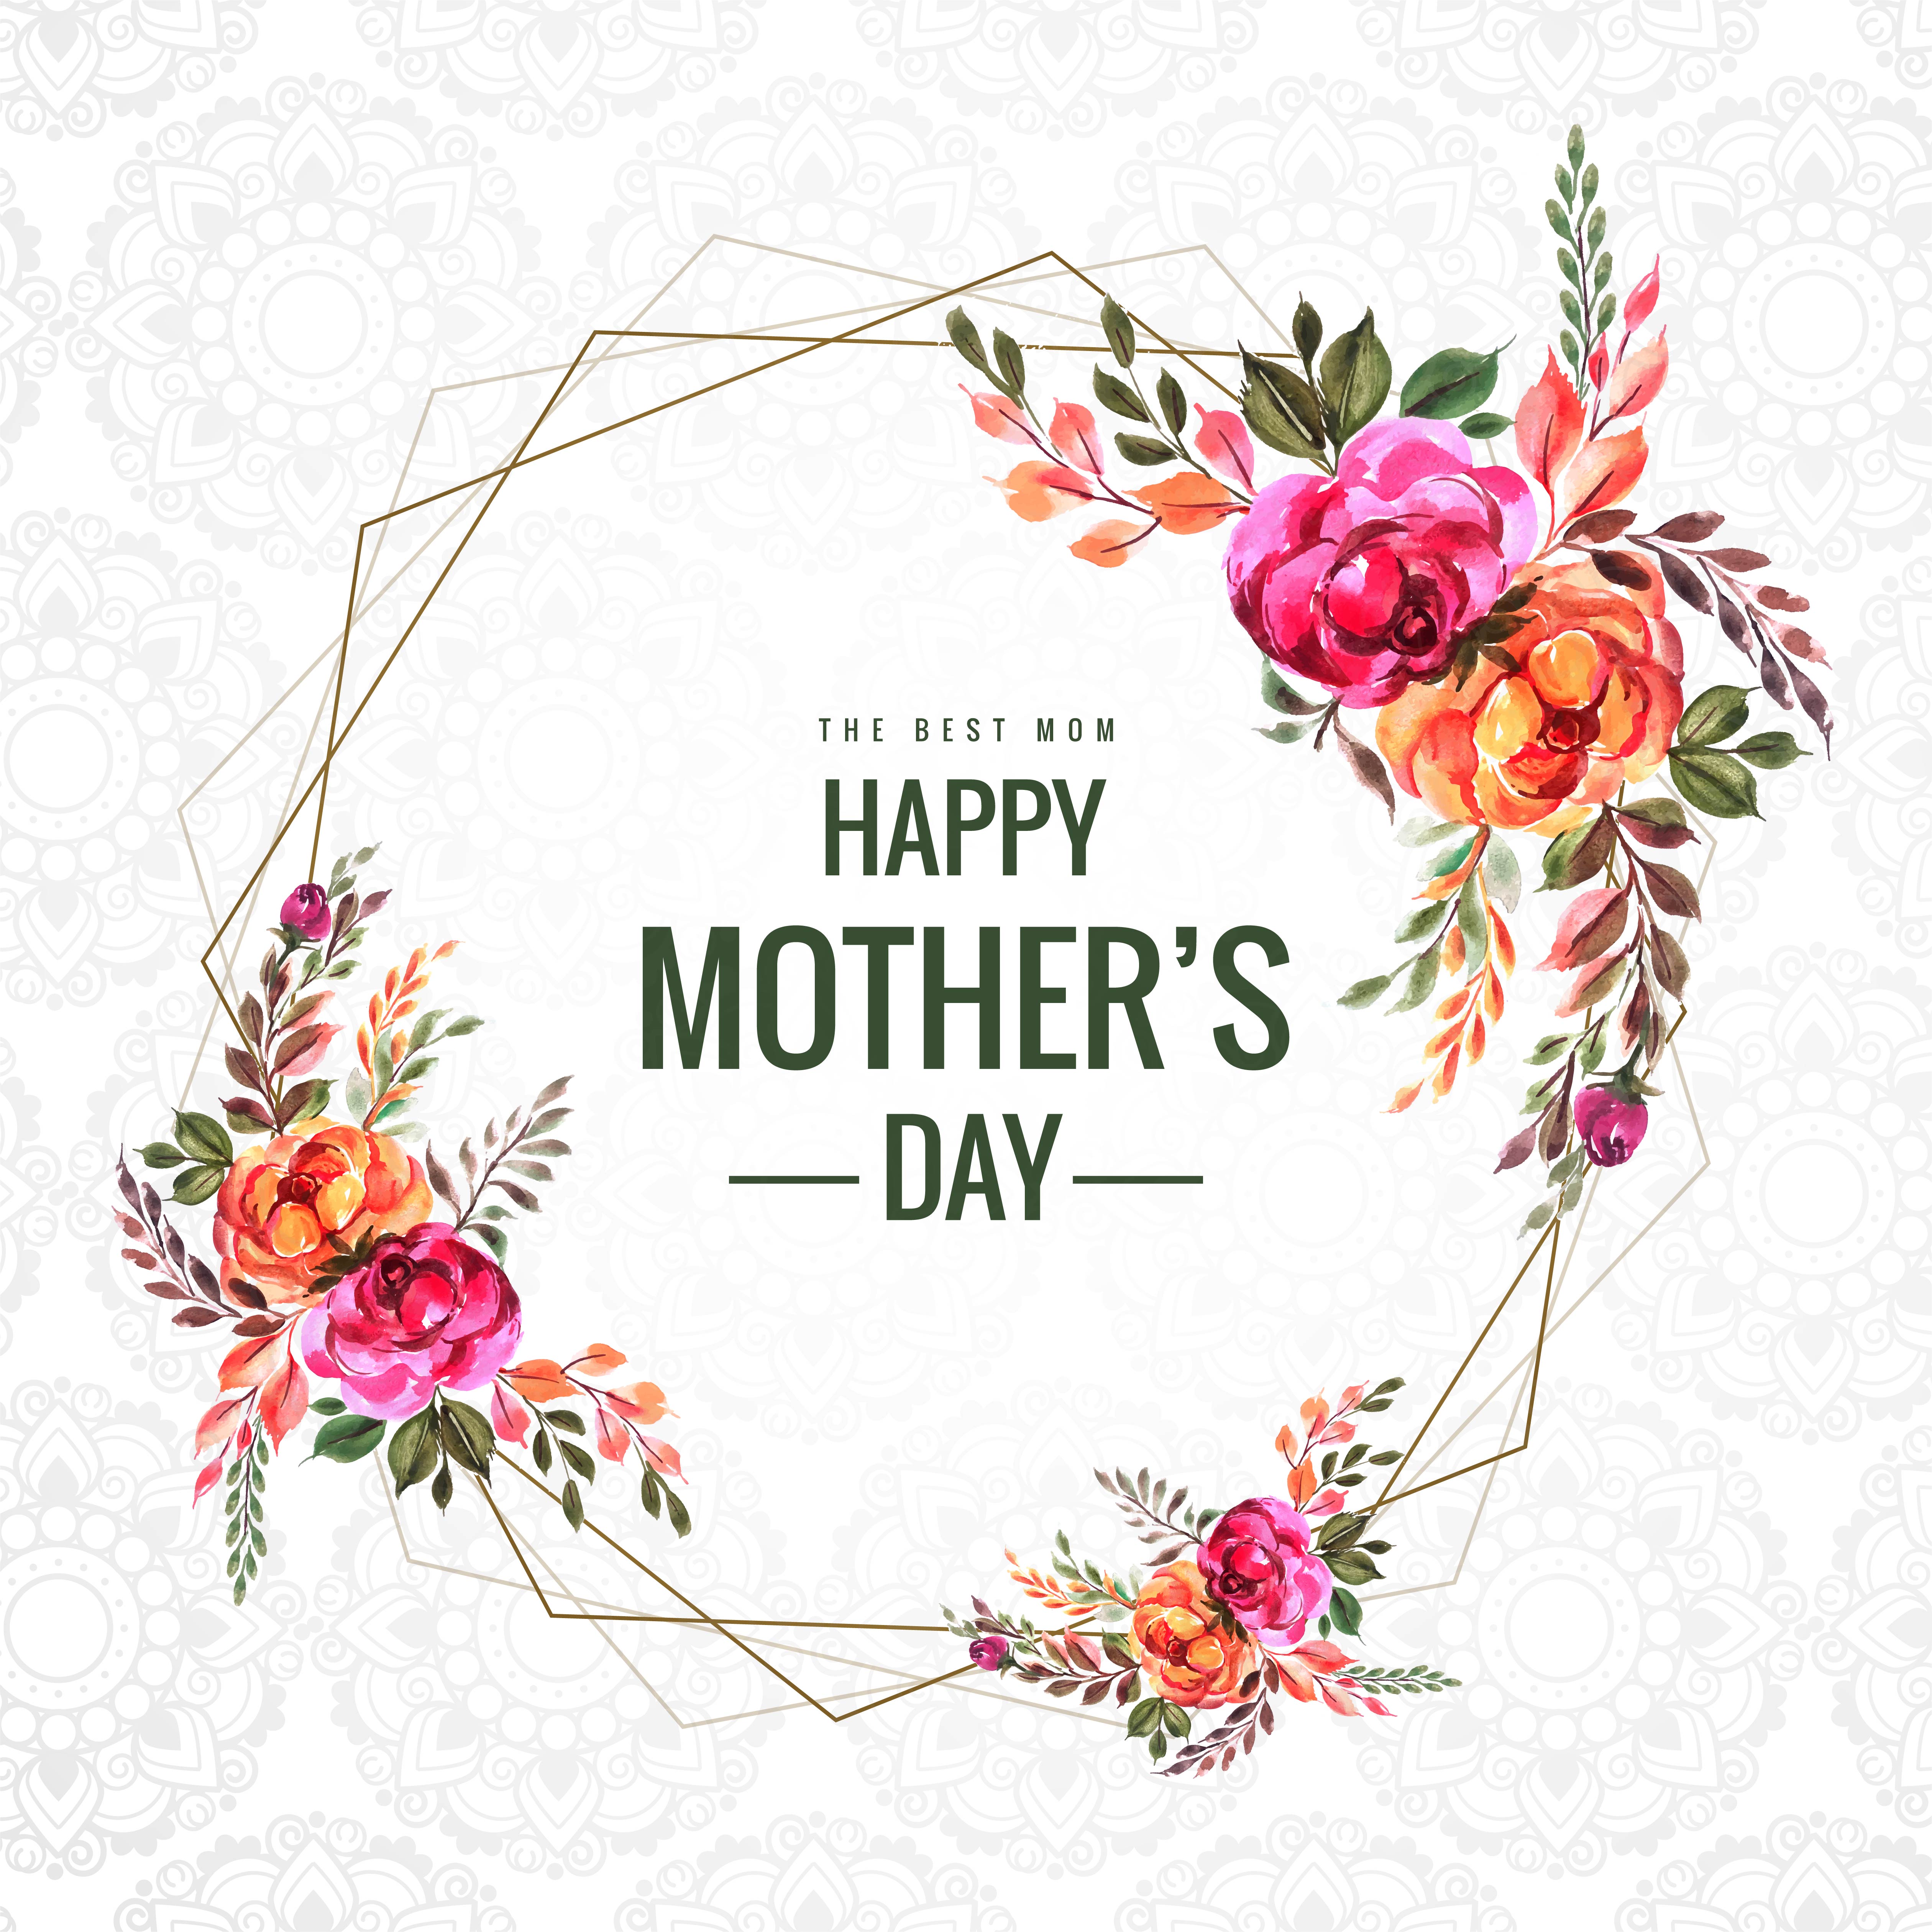 Happy Mother's Day flowers and geometric frame card 1045651 Download